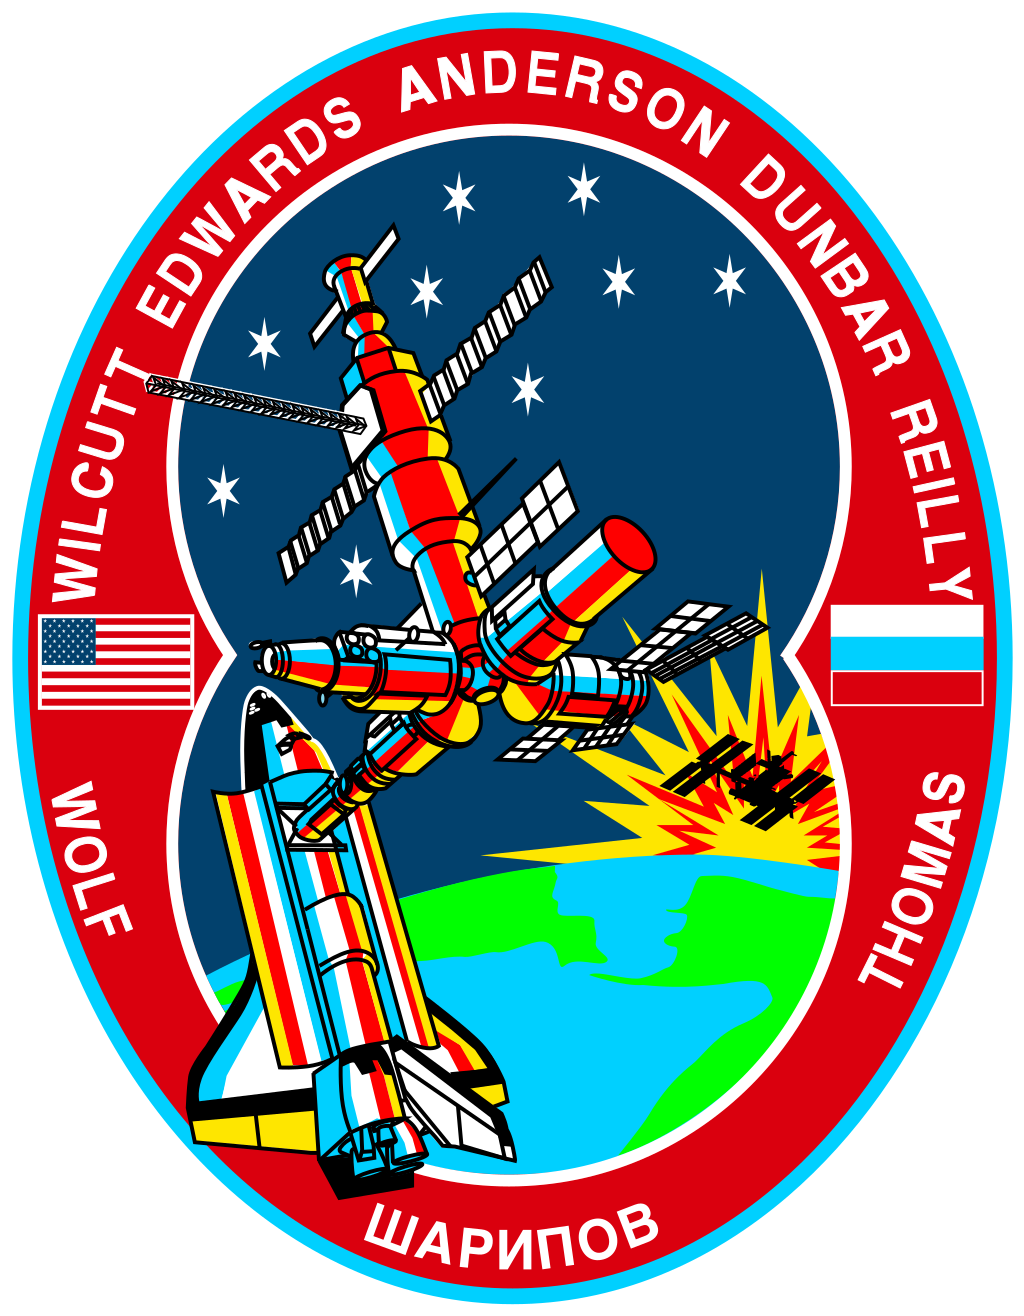 Mission patch for STS-89